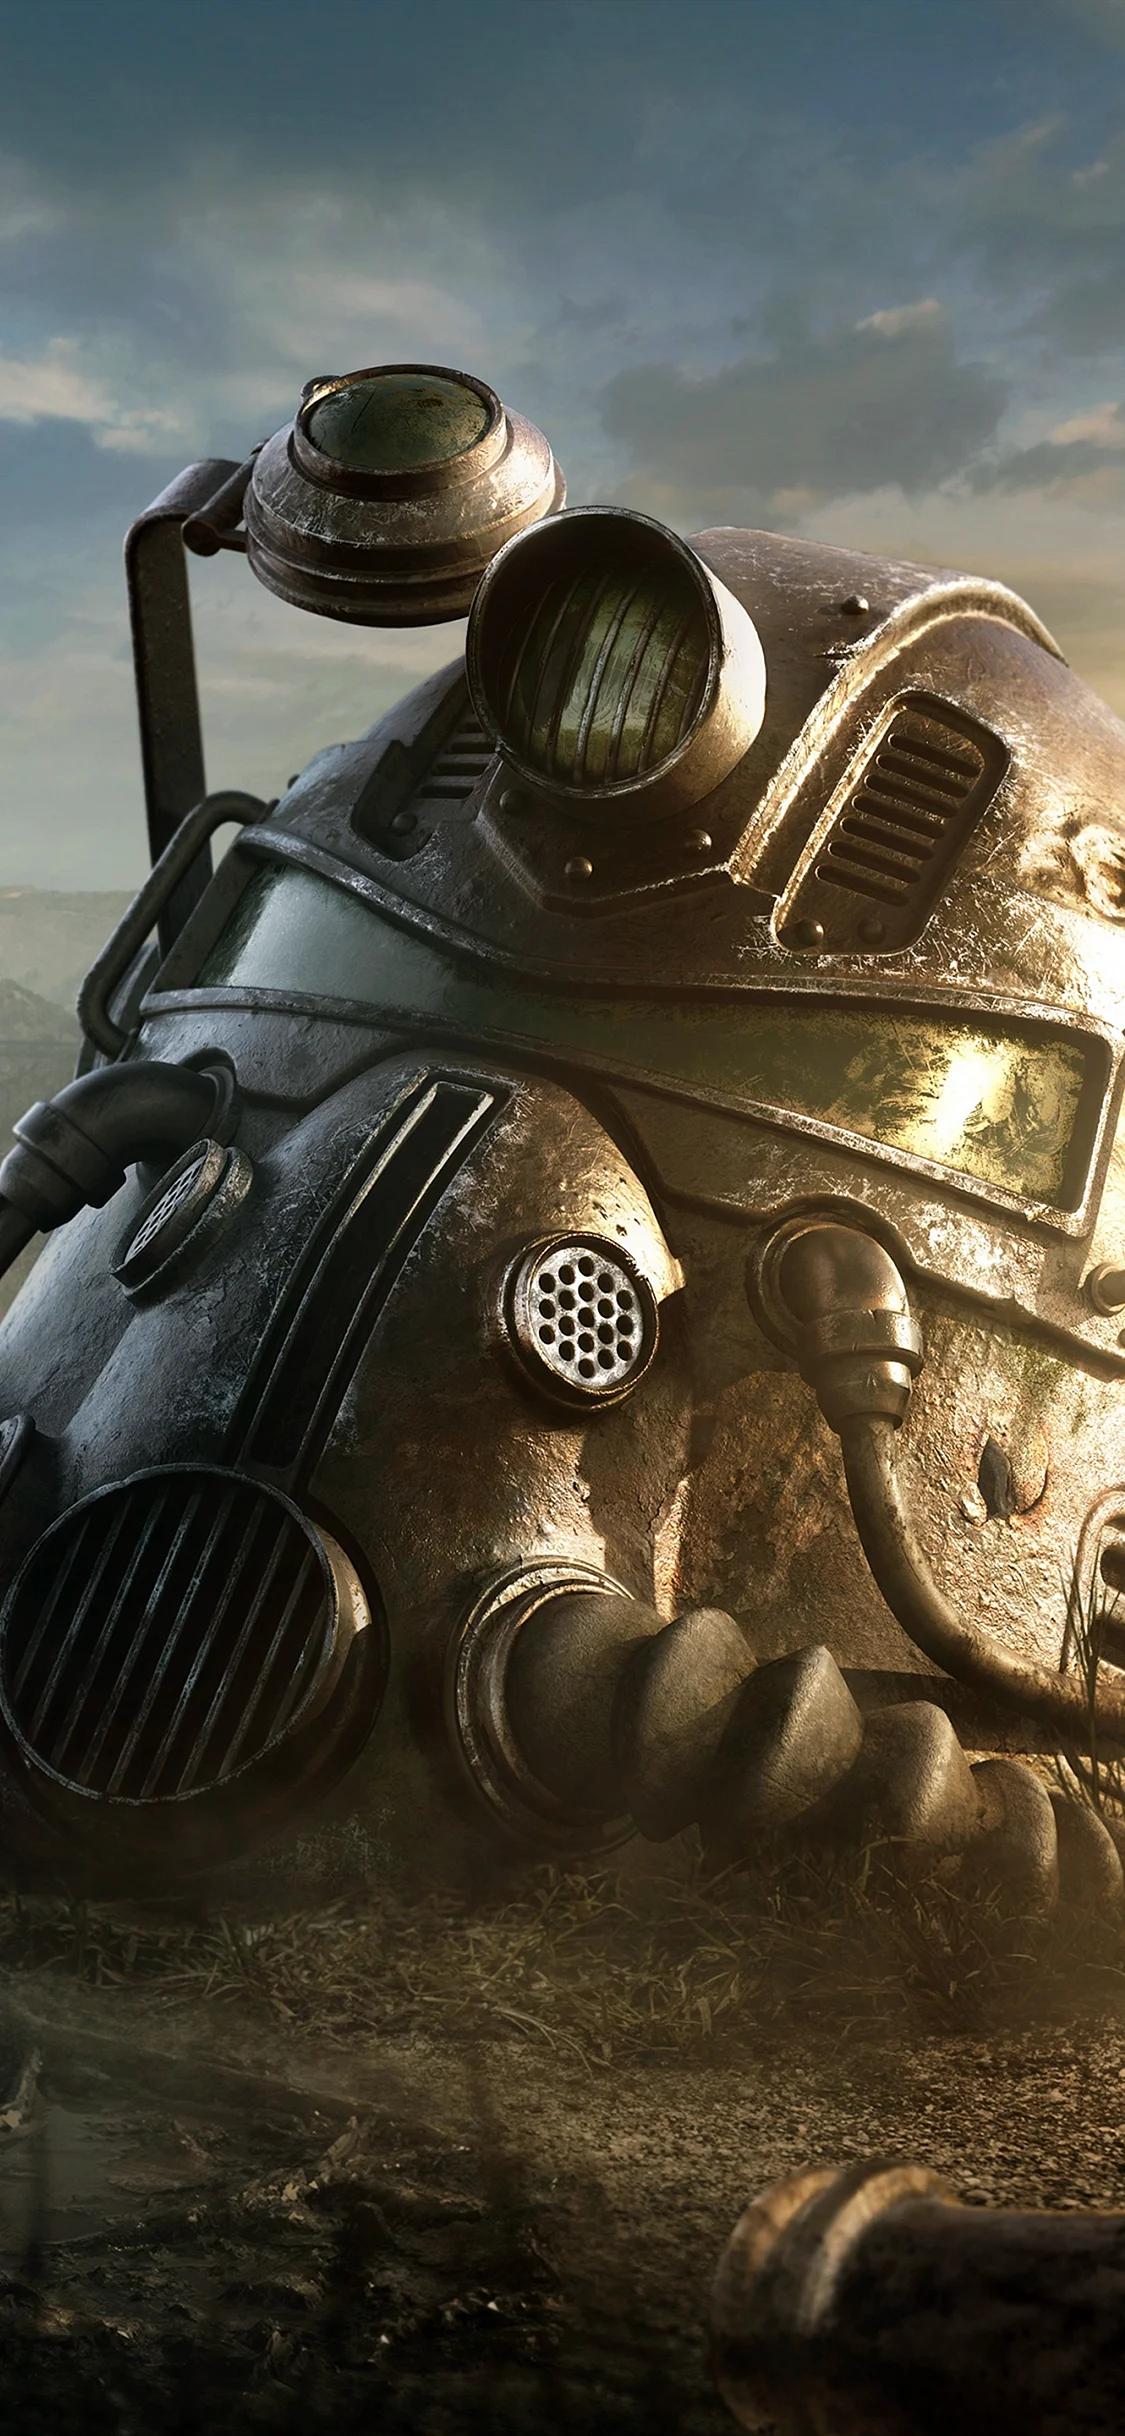 Fallout 76 Xbox One Wallpaper for iPhone 11 Pro